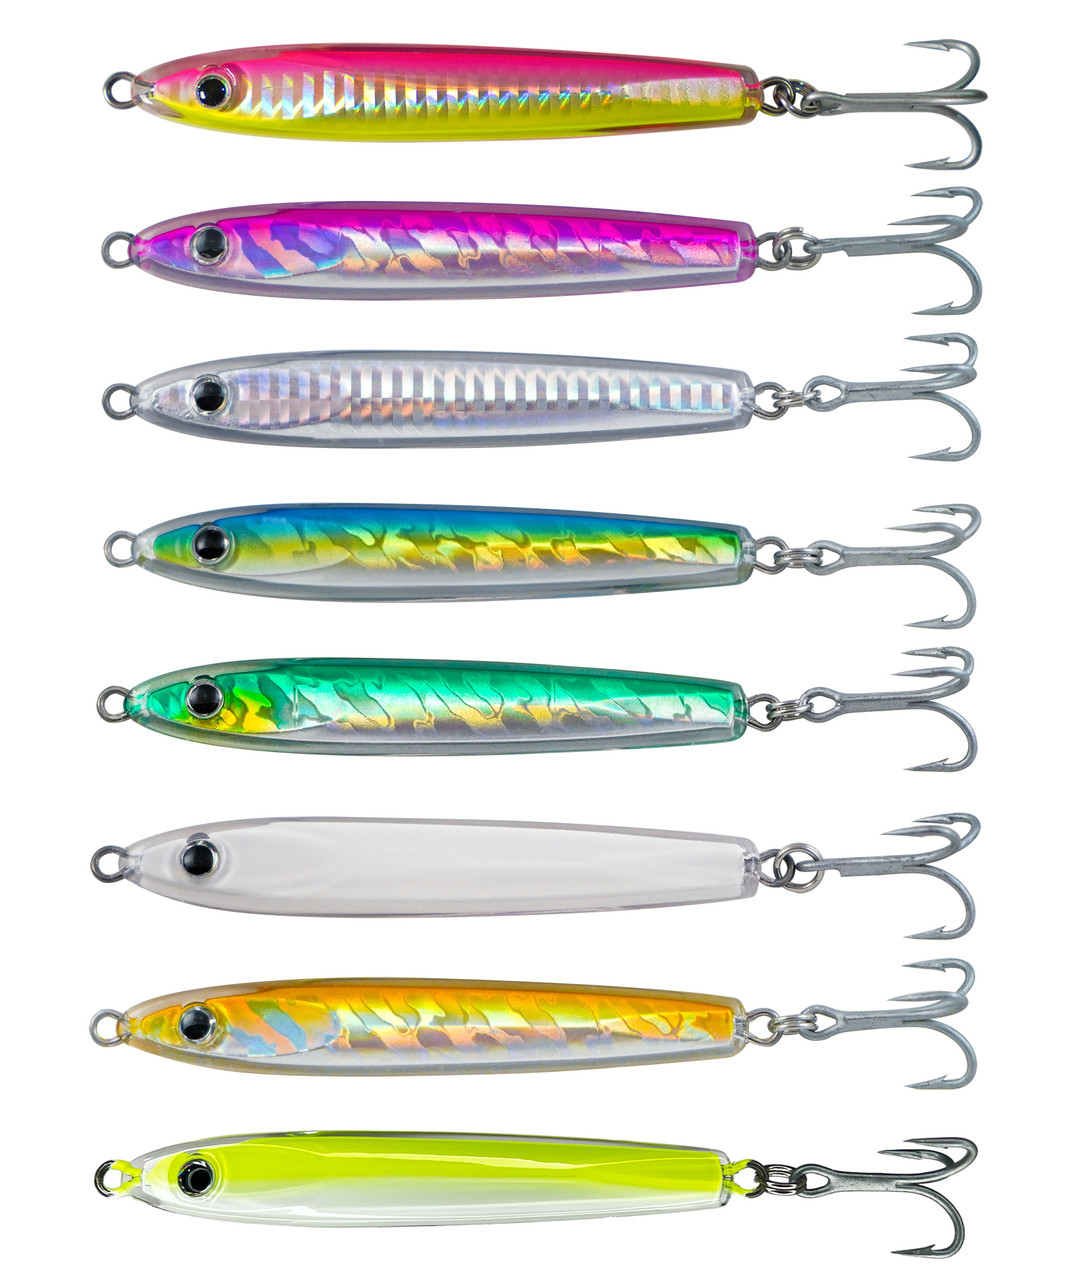 https://cdn11.bigcommerce.com/s-j76im4xc36/images/stencil/1280x1280/products/122/499/EXO_4in_-_All_8_Lures__29205.1710959471.jpg?c=1